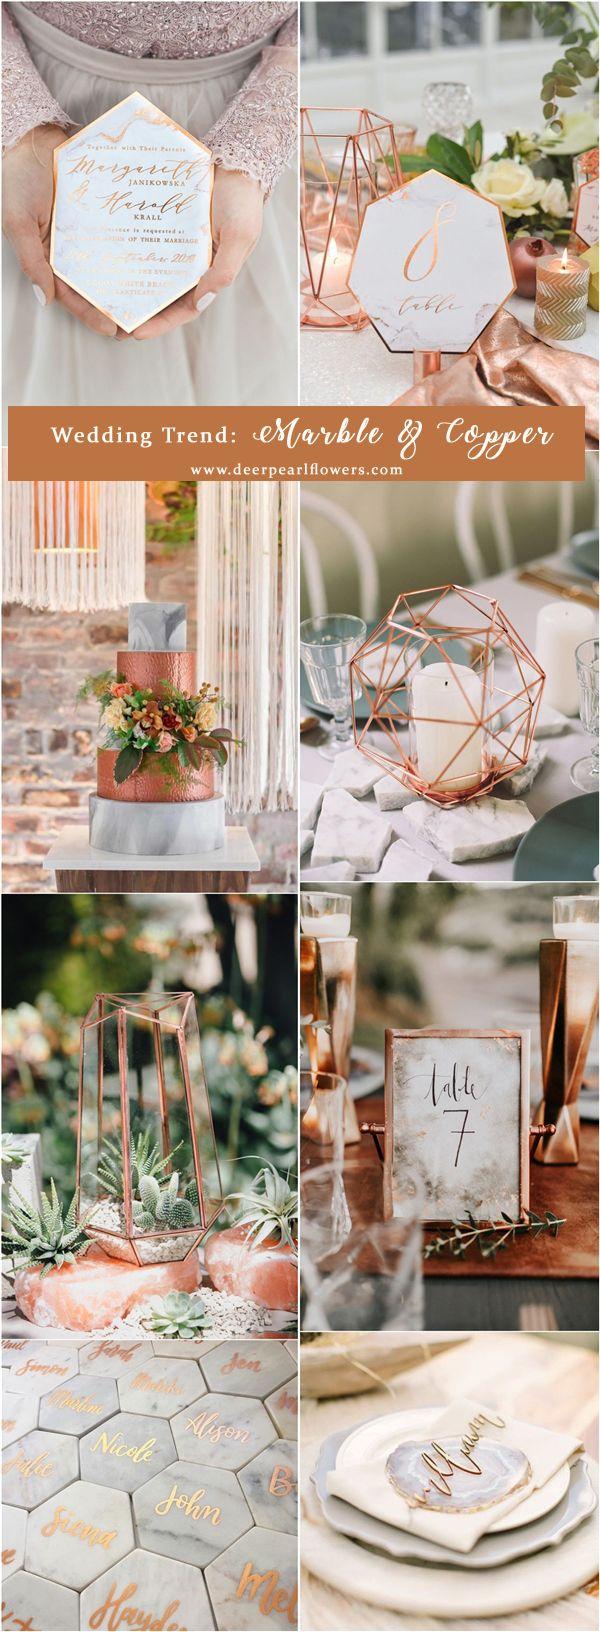 Wedding - Top 6 Wedding Trends For 2018 You’ll Love